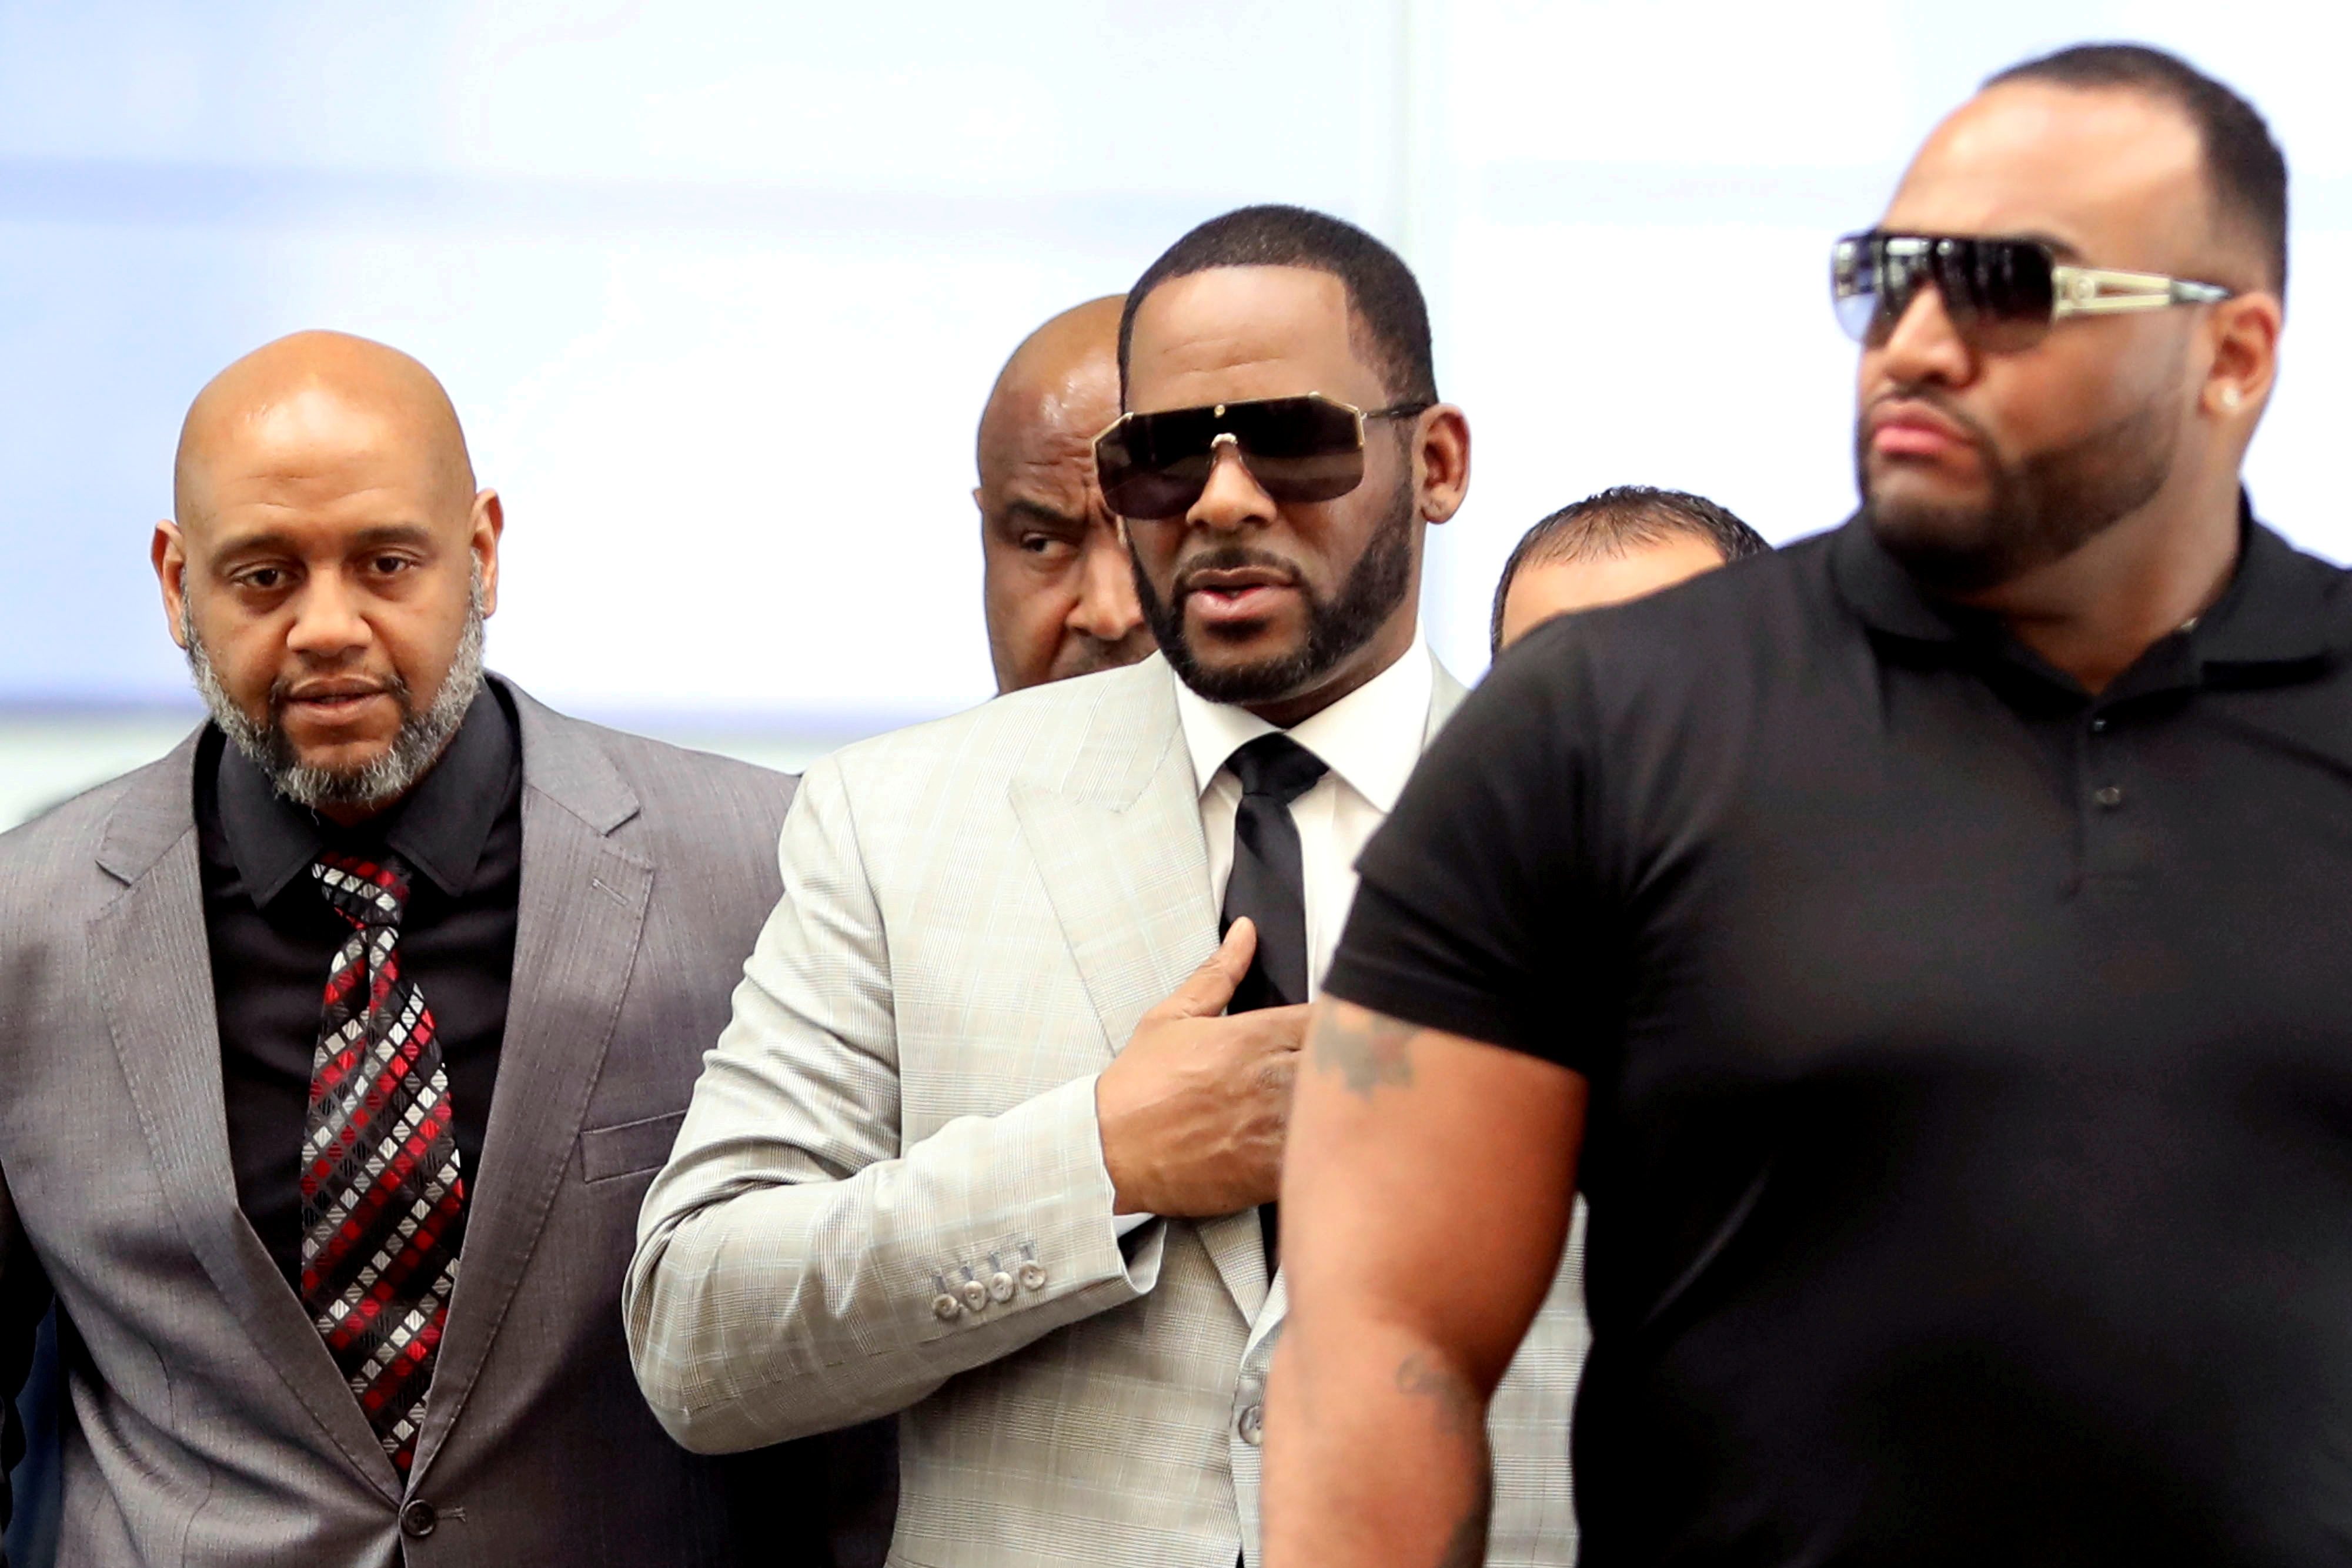 Former R. Kelly assistant saw singer’s sexual activity, was pressed to write apology letter